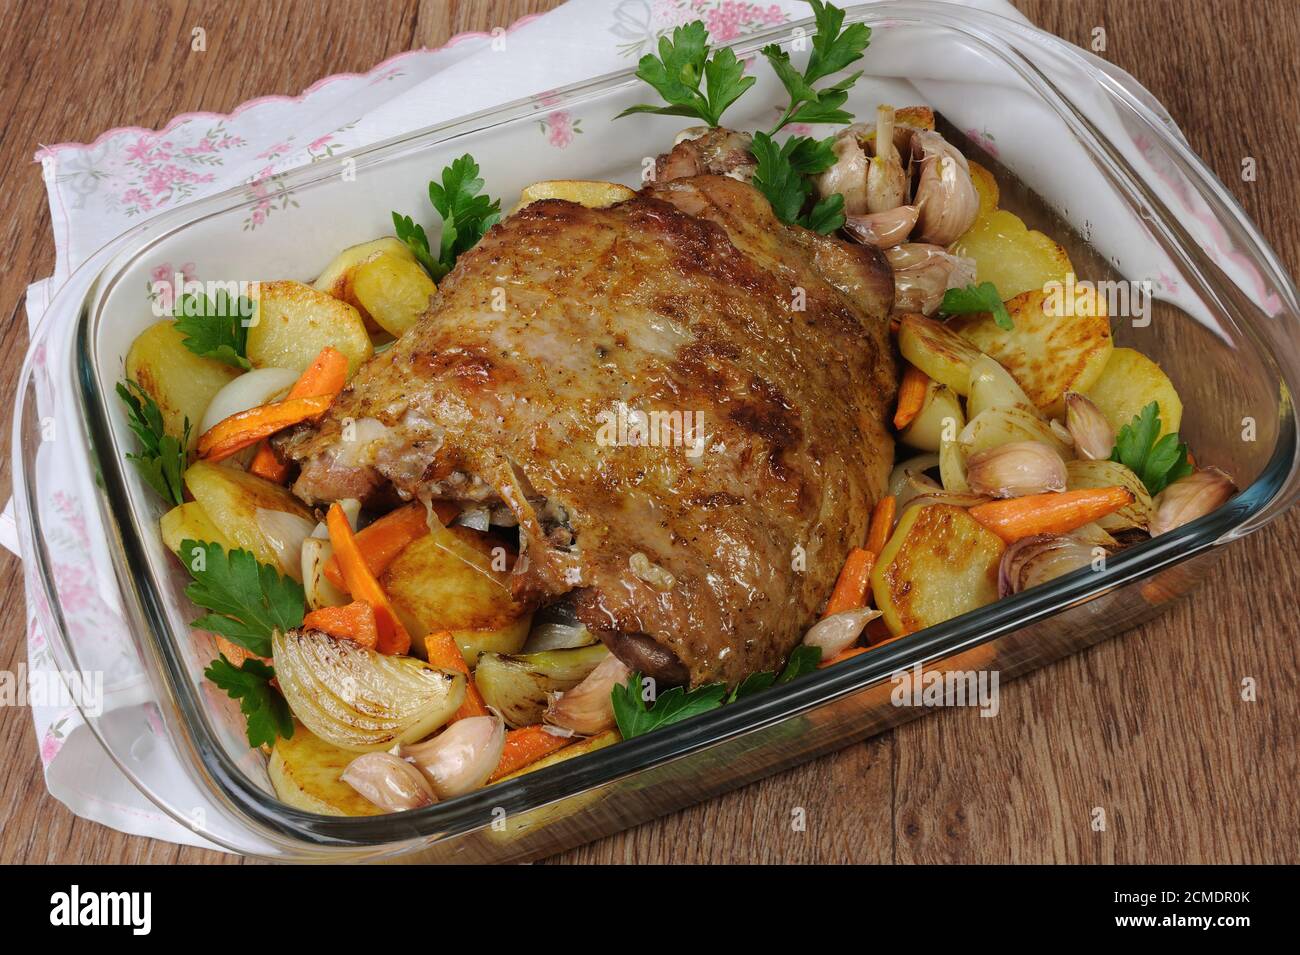 Turkey thigh baked with vegetables Stock Photo